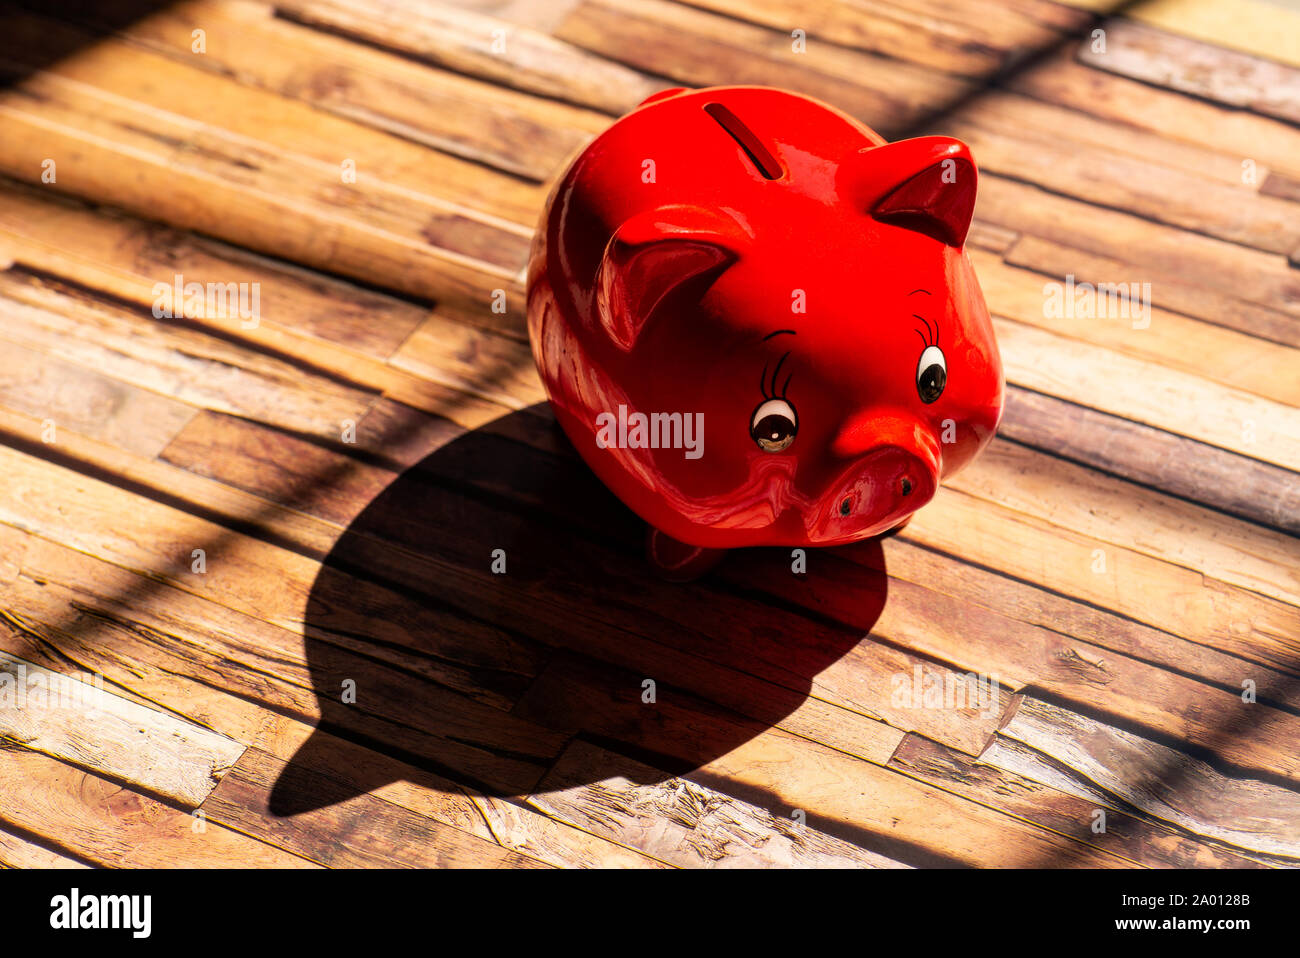 A red piggy bank stands on a wooden floor and casts a strong shadow Stock Photo